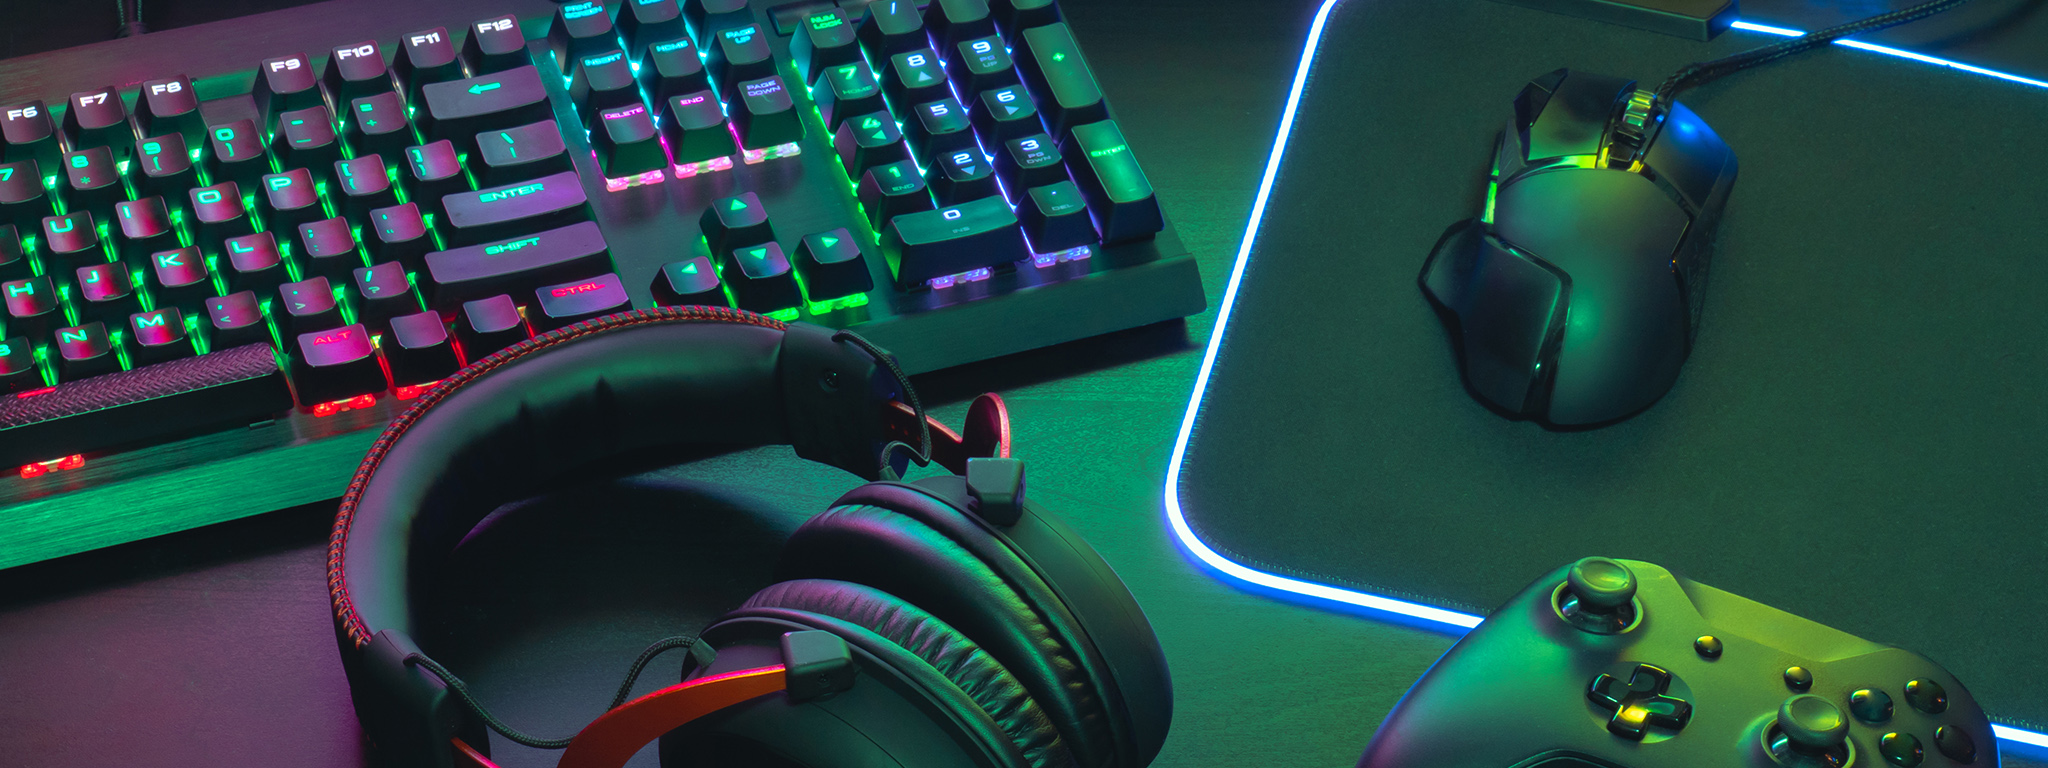 A gamer’s desk featuring an RGB keyboard, gamer headset, gaming mouse and RGB mouse pad, and a wireless Xbox controller